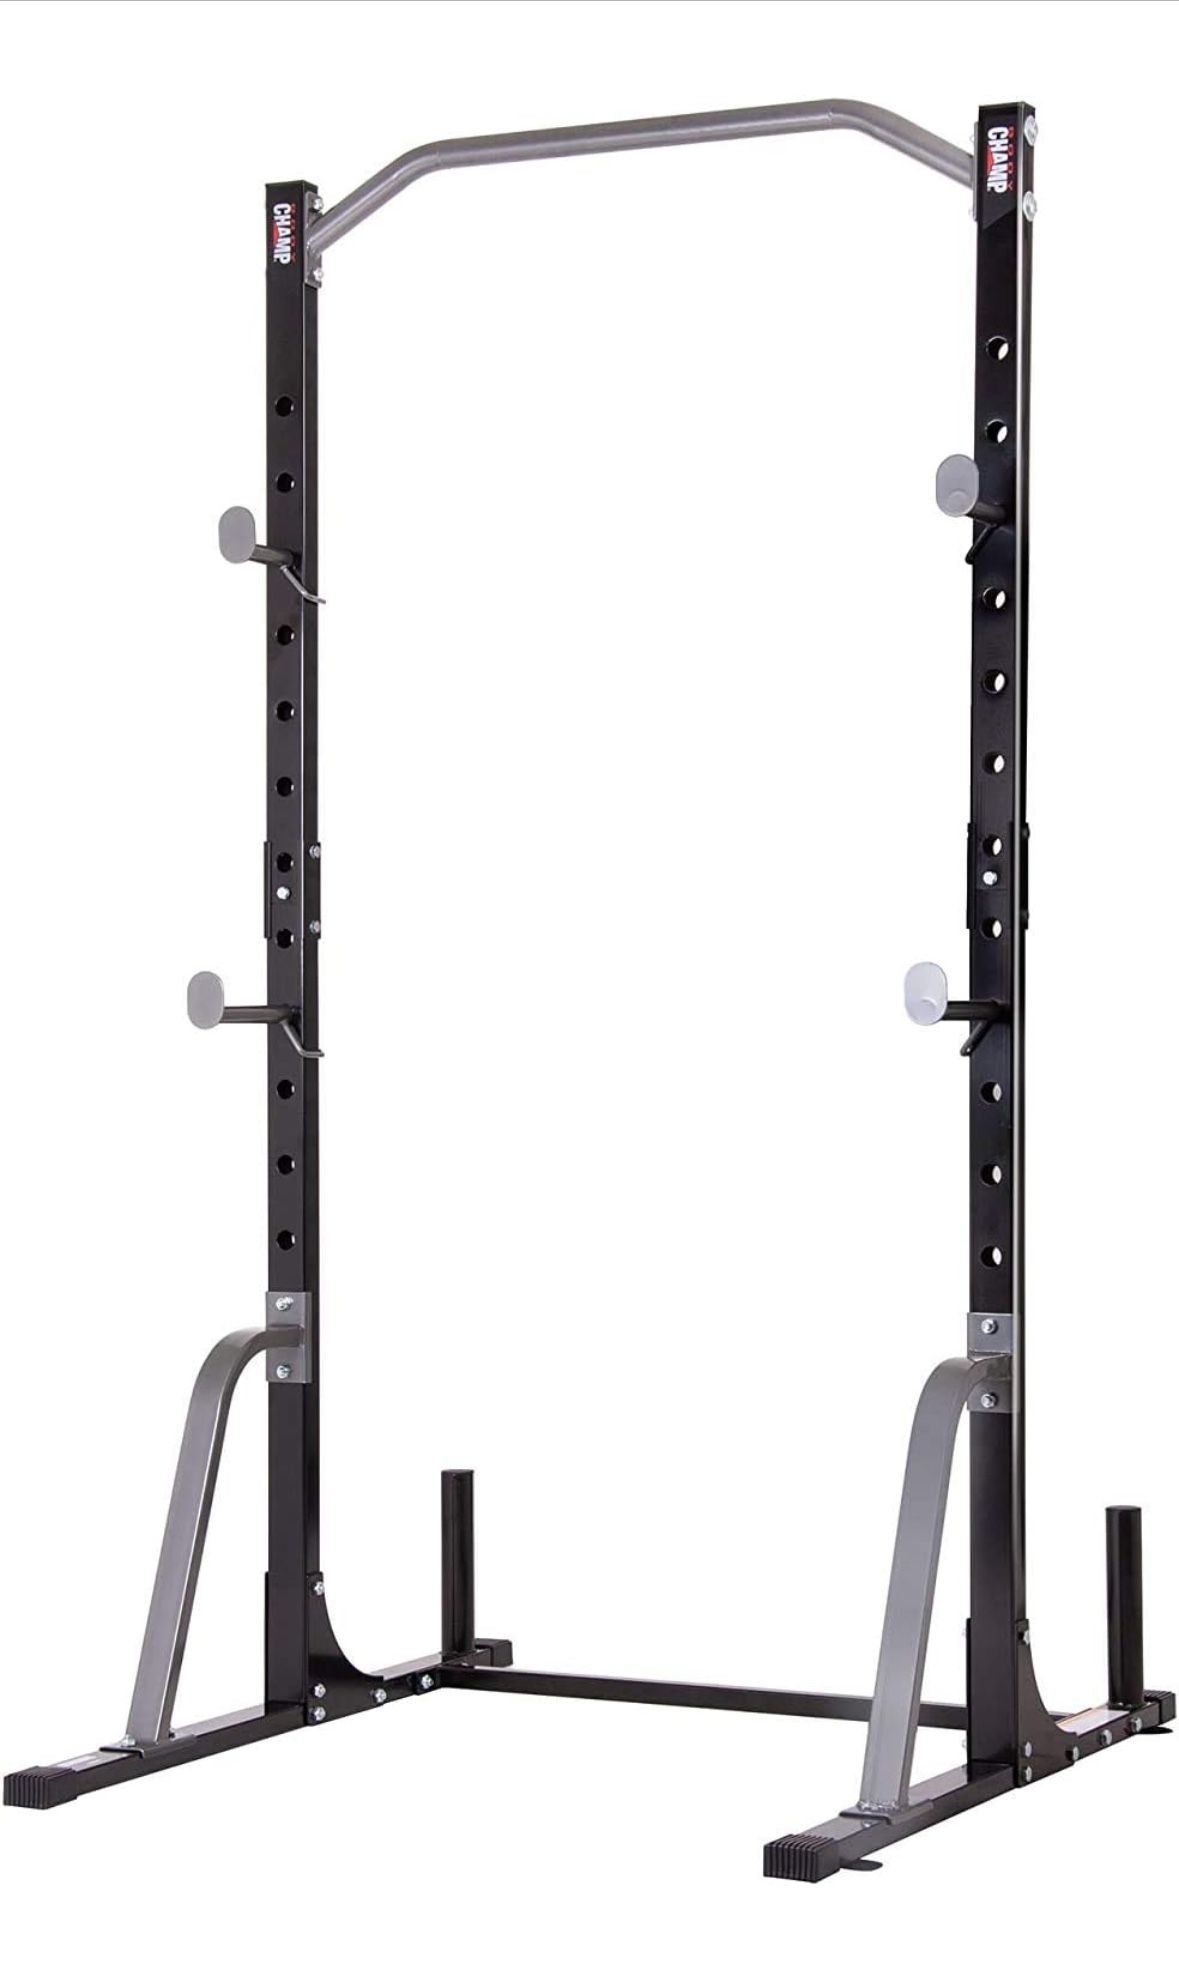 Body Champ Power Rack System Adjustable Squat Rack Weight